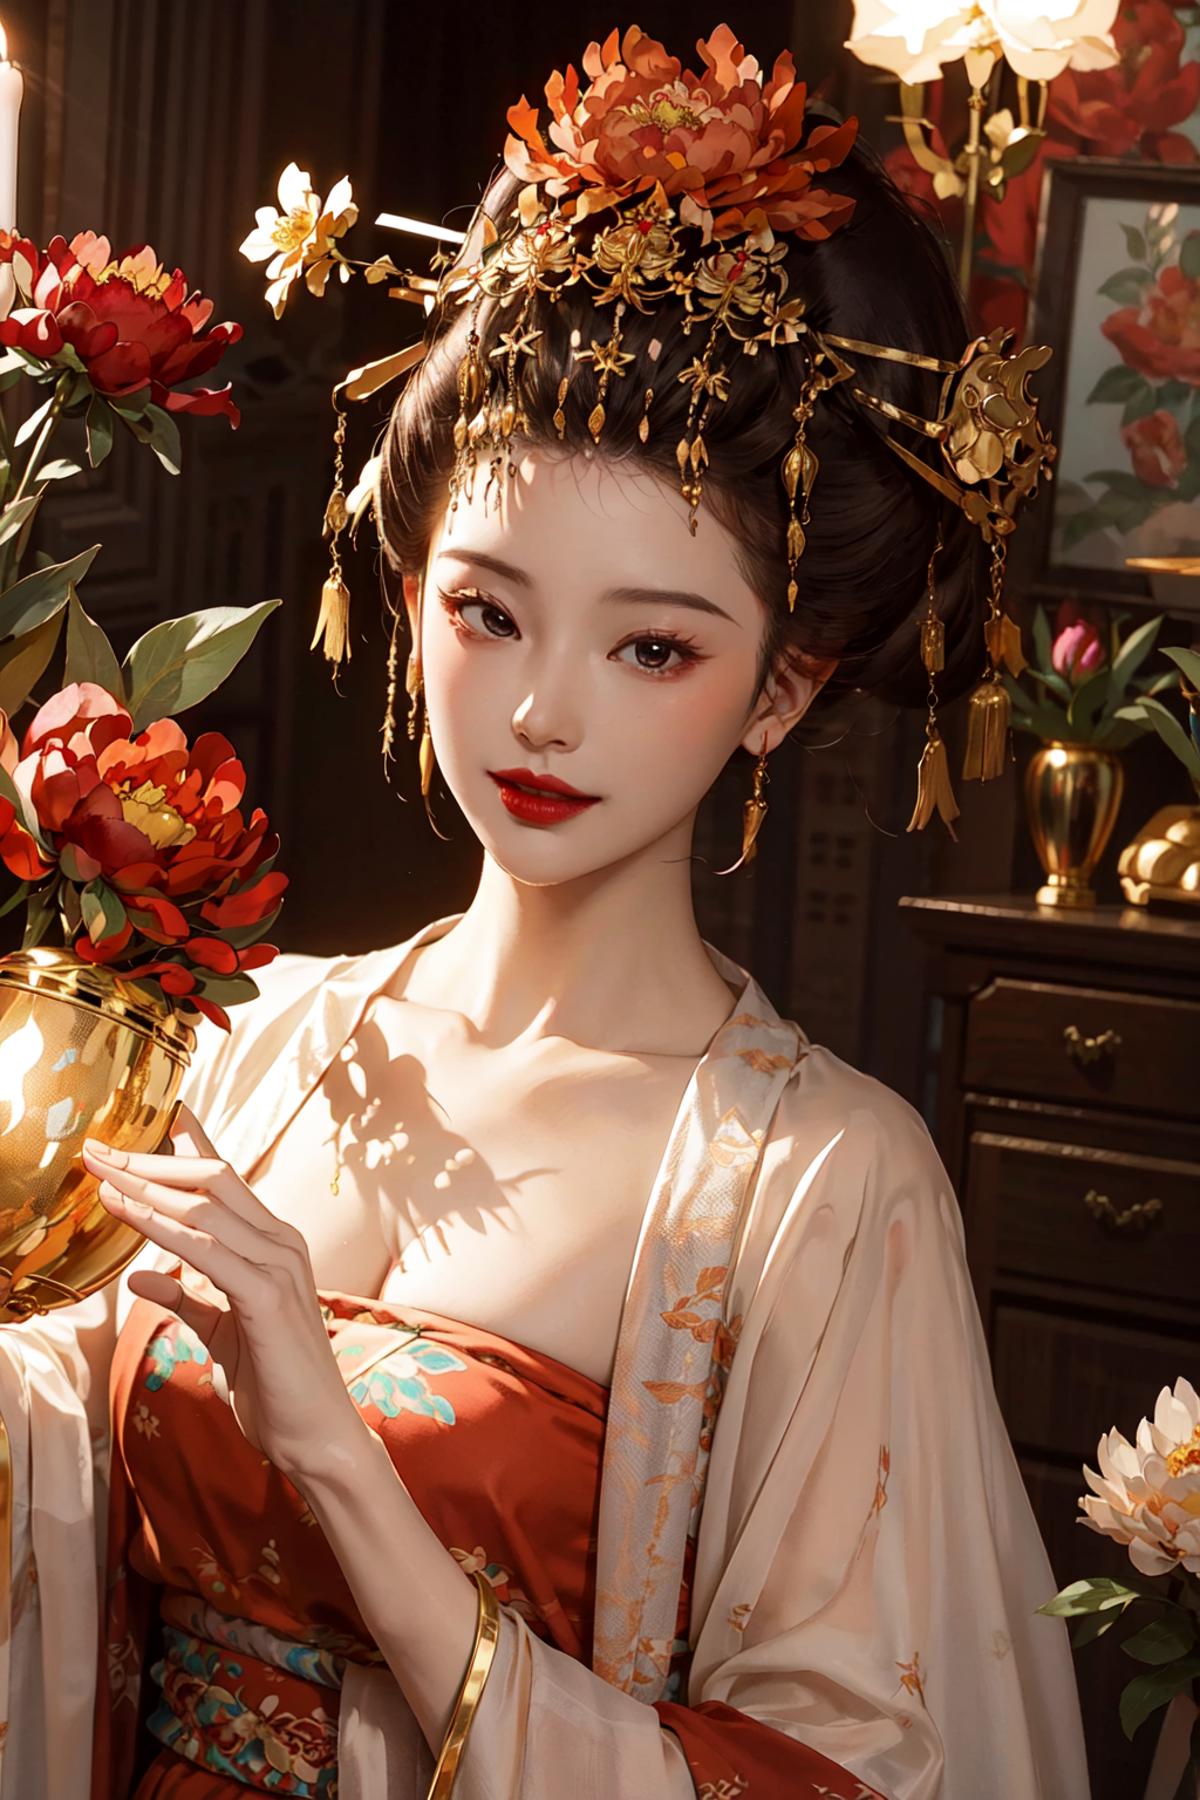 Zanhua 簪花 | Chinese style image by AprilW